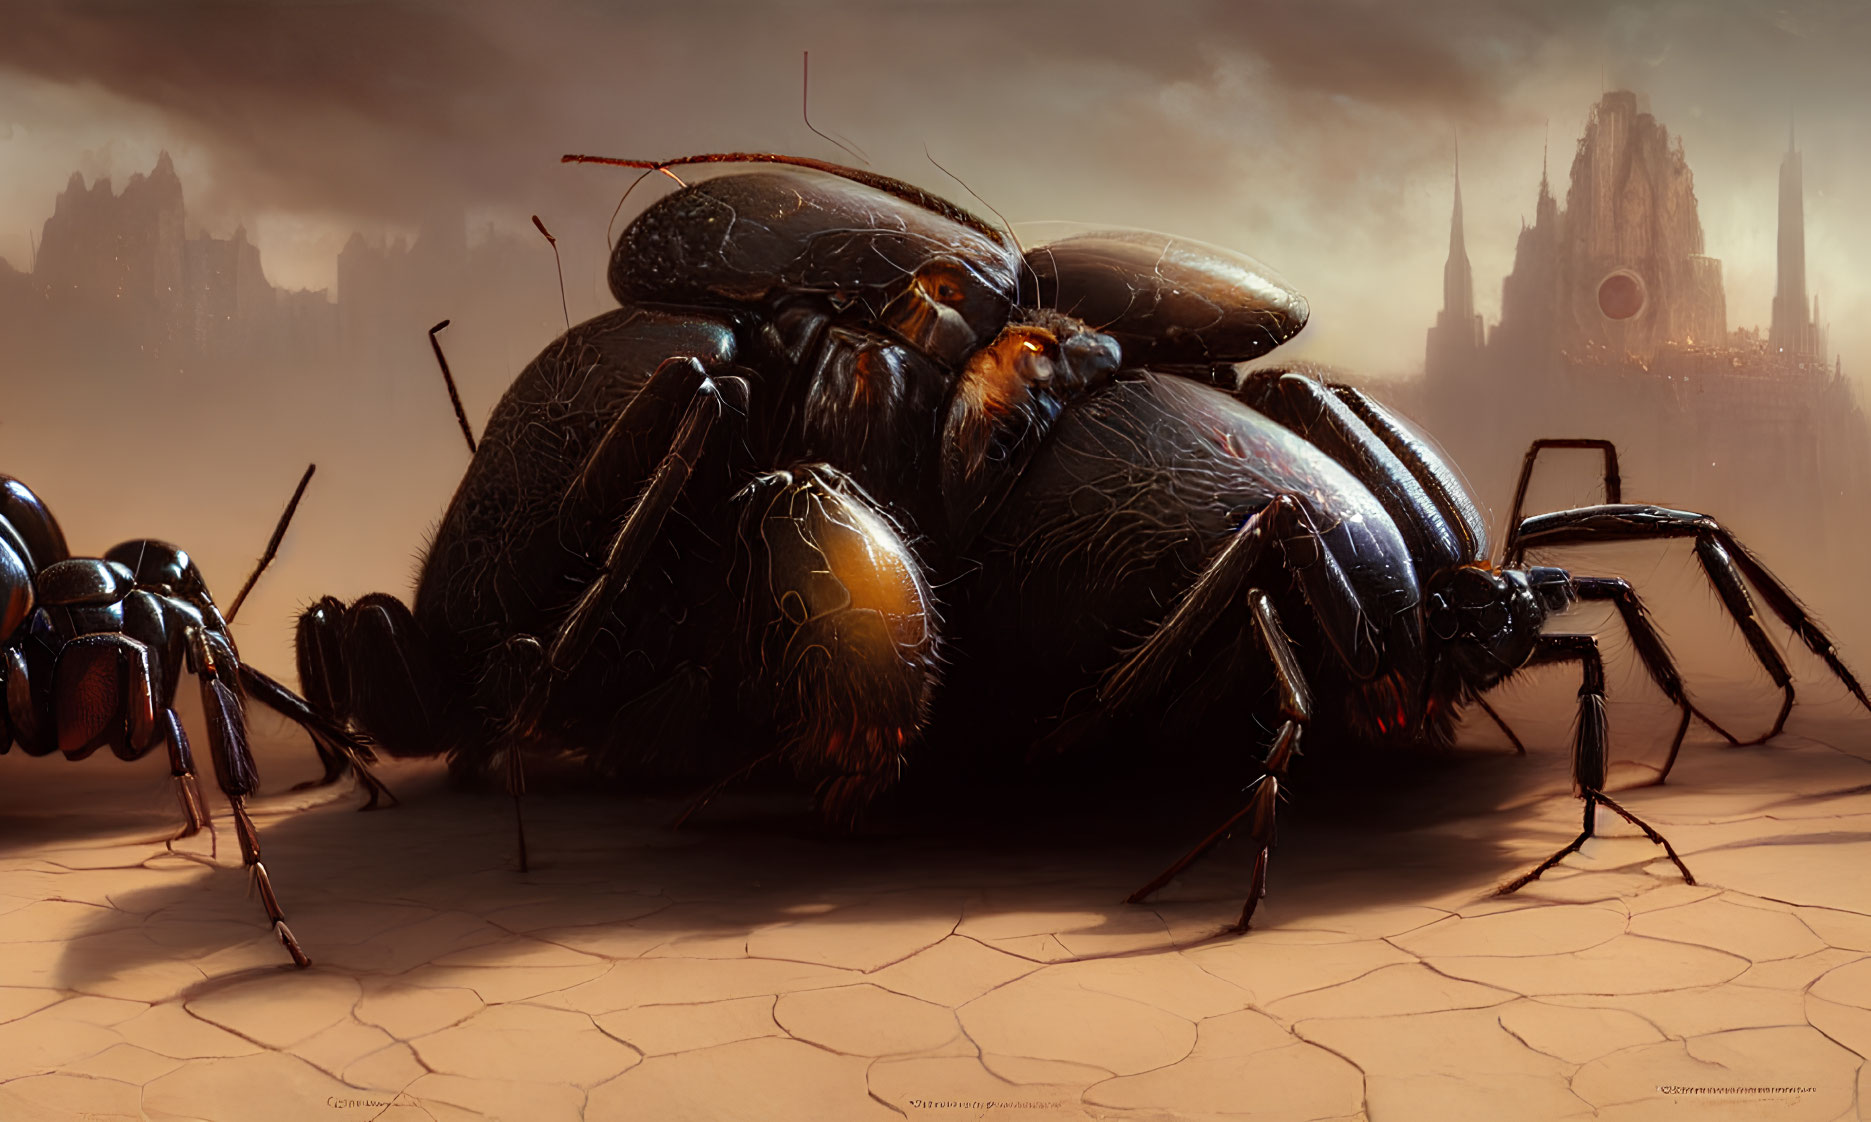 Detailed surreal scene: giant beetles on cracked ground with mysterious city and red eclipse.